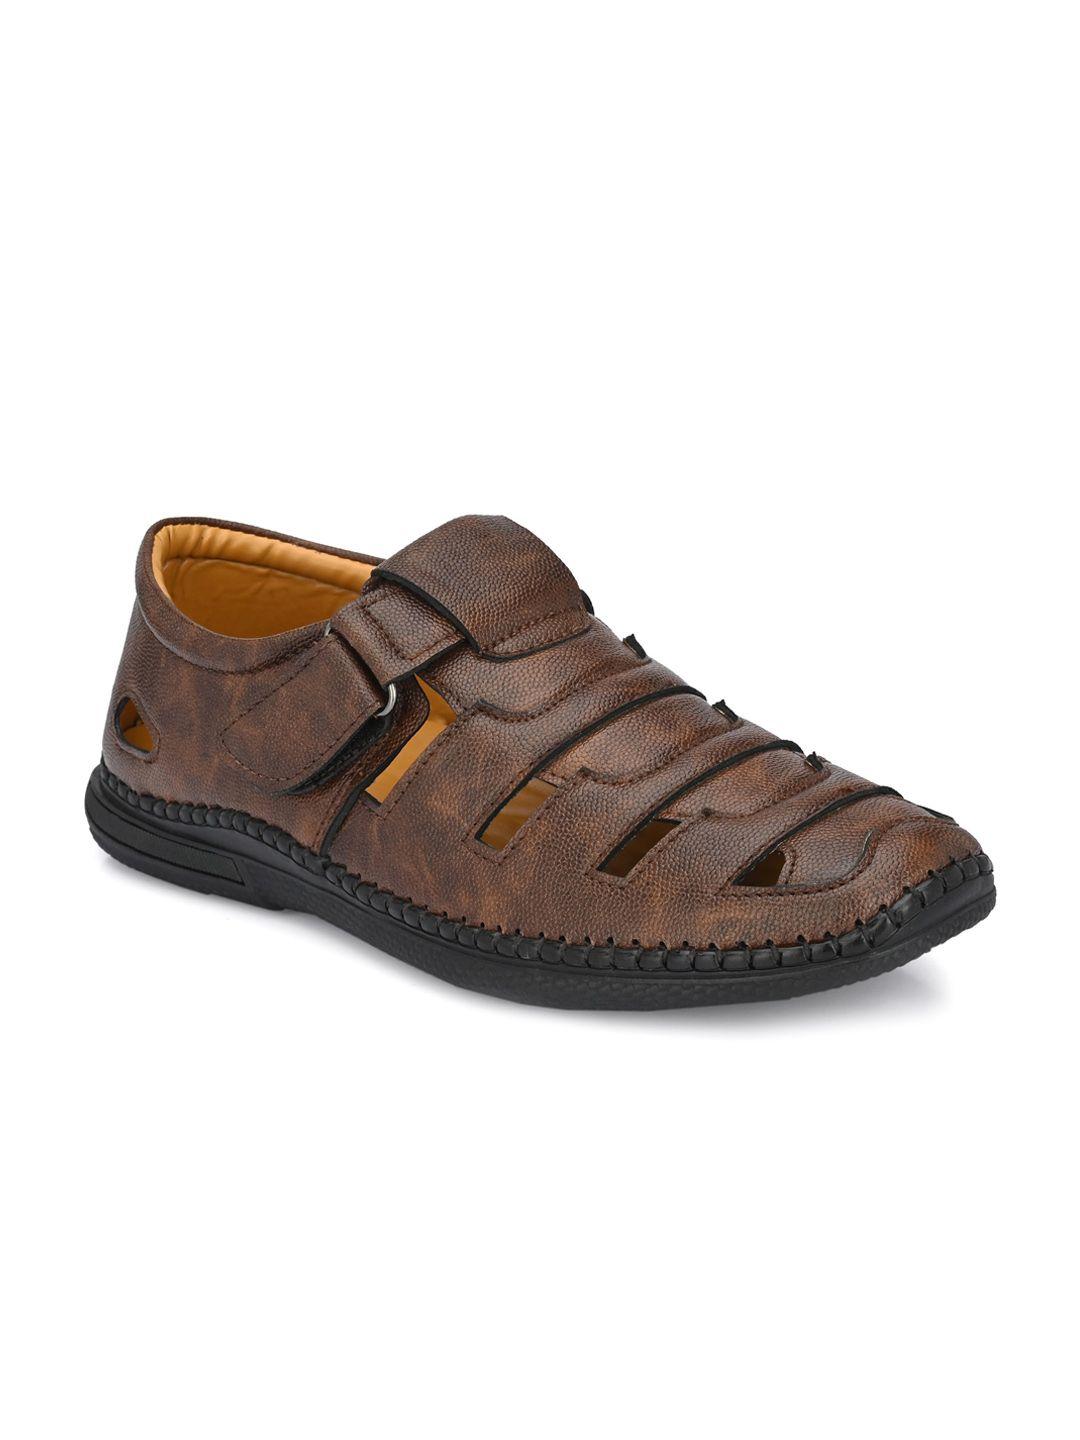 the roadster lifestyle co men brown shoe-style sandals